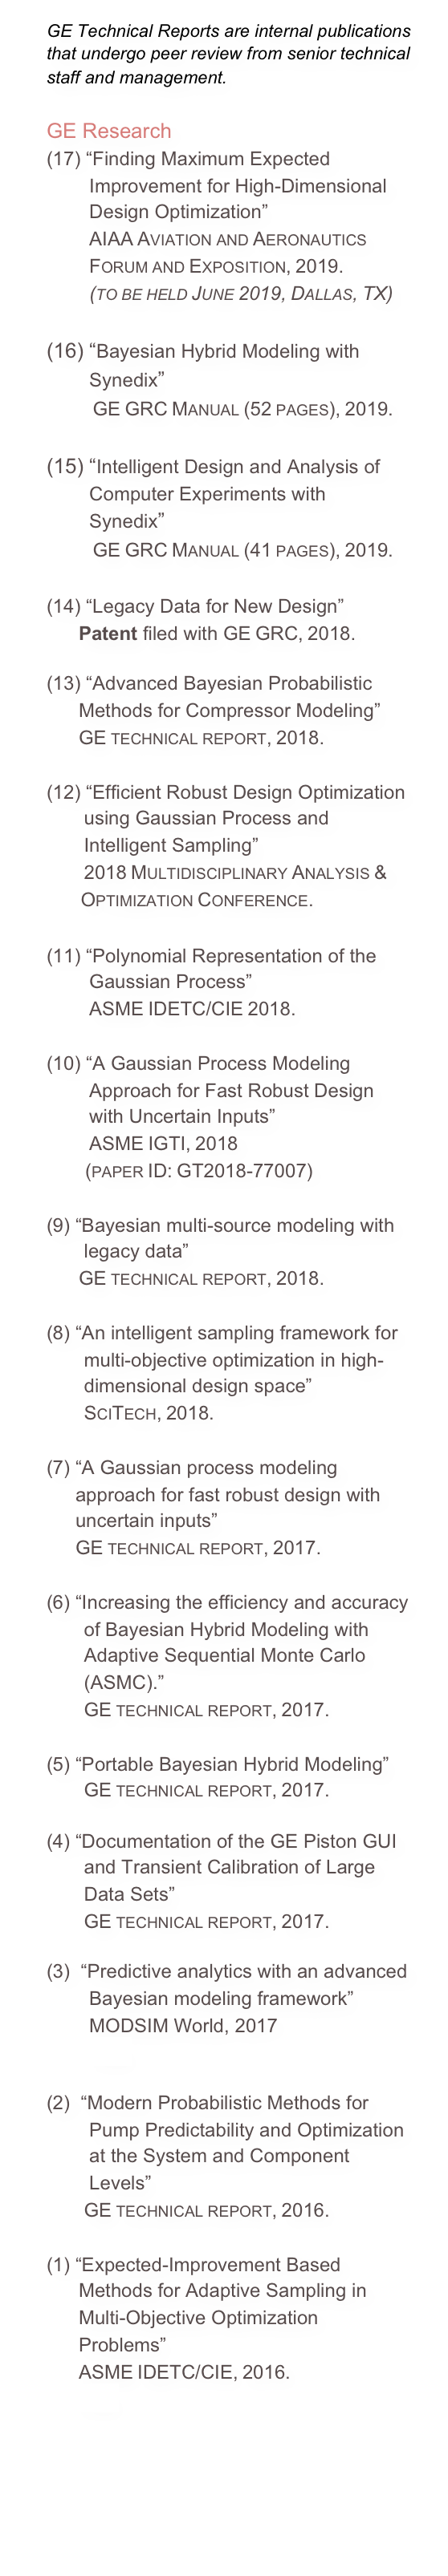 GE Technical Reports are internal publications that undergo peer review from senior technical staff and management.

GE Research
“Finding Maximum Expected
        Improvement for High-Dimensional
        Design Optimization”
        AIAA Aviation and Aeronautics
          Forum and Exposition, 2019.
          (to be held June 2019, Dallas, TX)

(16) “Bayesian Hybrid Modeling with         Synedix”         GE GRC Manual (52 pages), 2019.

(15) “Intelligent Design and Analysis of         Computer Experiments with         Synedix”         GE GRC Manual (41 pages), 2019.

(14) “Legacy Data for New Design”
      Patent filed with GE GRC, 2018.

(13) “Advanced Bayesian Probabilistic       Methods for Compressor Modeling”
      GE technical report, 2018.

(12) “Efficient Robust Design Optimization        using Gaussian Process and         Intelligent Sampling”
       2018 Multidisciplinary Analysis &         Optimization Conference.

(11) “Polynomial Representation of the          Gaussian Process”
        ASME IDETC/CIE 2018.

(10) “A Gaussian Process Modeling         Approach for Fast Robust Design         with Uncertain Inputs”
        ASME IGTI, 2018          (paper ID: GT2018-77007)

(9) “Bayesian multi-source modeling with        legacy data”
      GE technical report, 2018.

(8) “An intelligent sampling framework for        multi-objective optimization in high-        dimensional design space”        SciTech, 2018.

“A Gaussian process modeling approach for fast robust design with uncertain inputs” GE technical report, 2017.

(6) “Increasing the efficiency and accuracy        of Bayesian Hybrid Modeling with        Adaptive Sequential Monte Carlo        (ASMC).”        GE technical report, 2017.

(5) “Portable Bayesian Hybrid Modeling”        GE technical report, 2017.

(4) “Documentation of the GE Piston GUI        and Transient Calibration of Large        Data Sets”        GE technical report, 2017.

(3)  “Predictive analytics with an advanced           Bayesian modeling framework”         MODSIM World, 2017
        Link.

(2)  “Modern Probabilistic Methods for         Pump Predictability and Optimization
        at the System and Component         Levels”
       GE technical report, 2016.

(1) “Expected-Improvement Based       Methods for Adaptive Sampling in       Multi-Objective Optimization       Problems”       ASME IDETC/CIE, 2016.
       Link.


